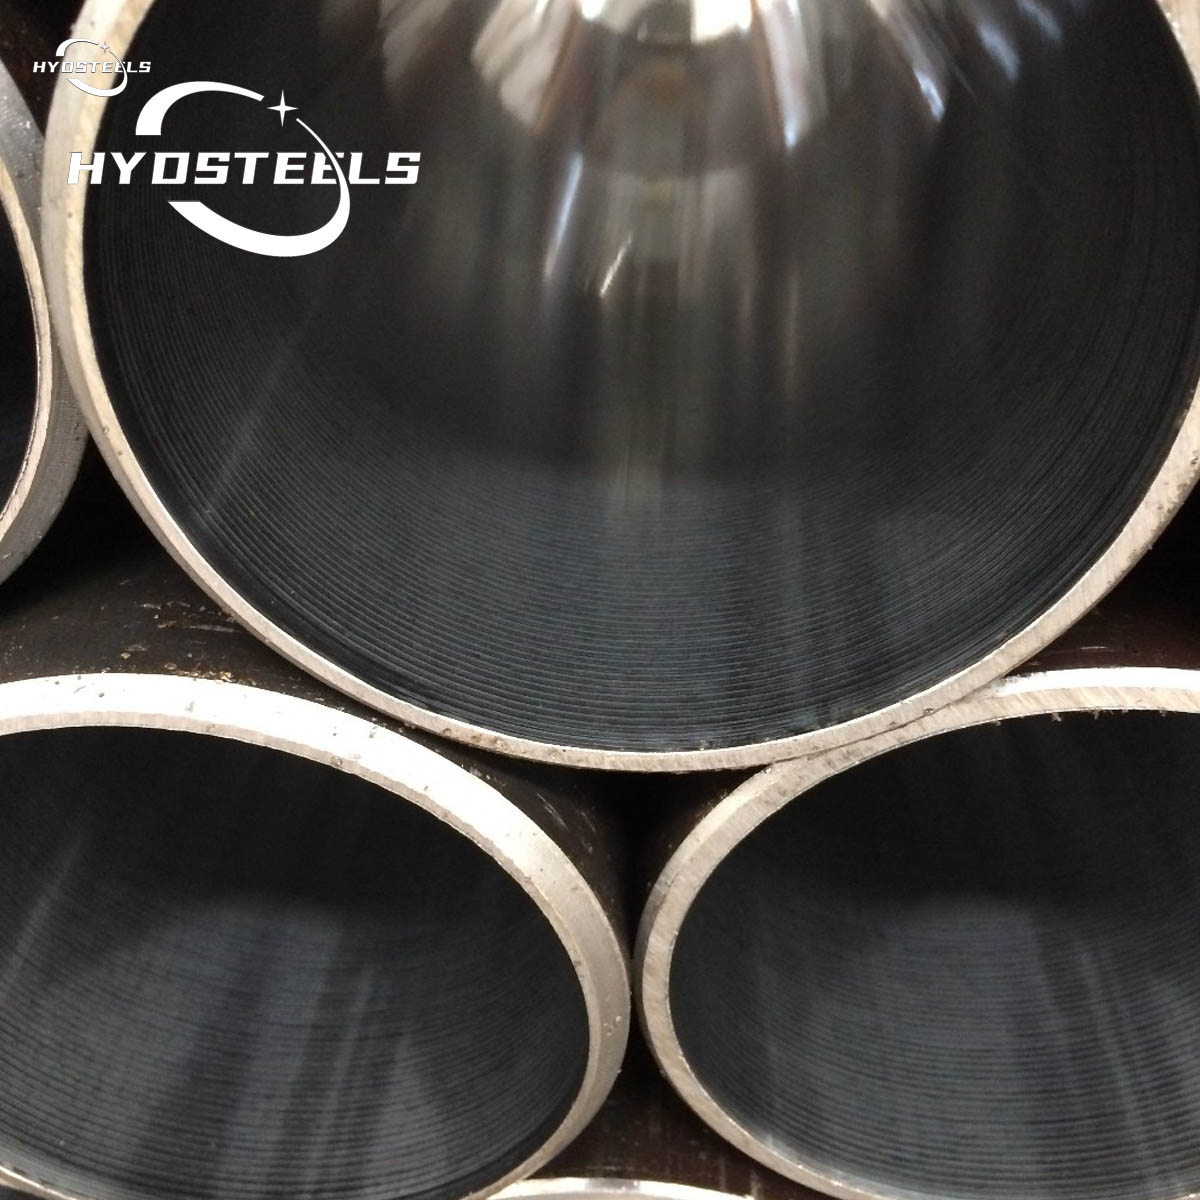 Honing Seamless Honed Tube Cold Drawn Hydraulic Cylinder Tube Supplier Manufacturer in China